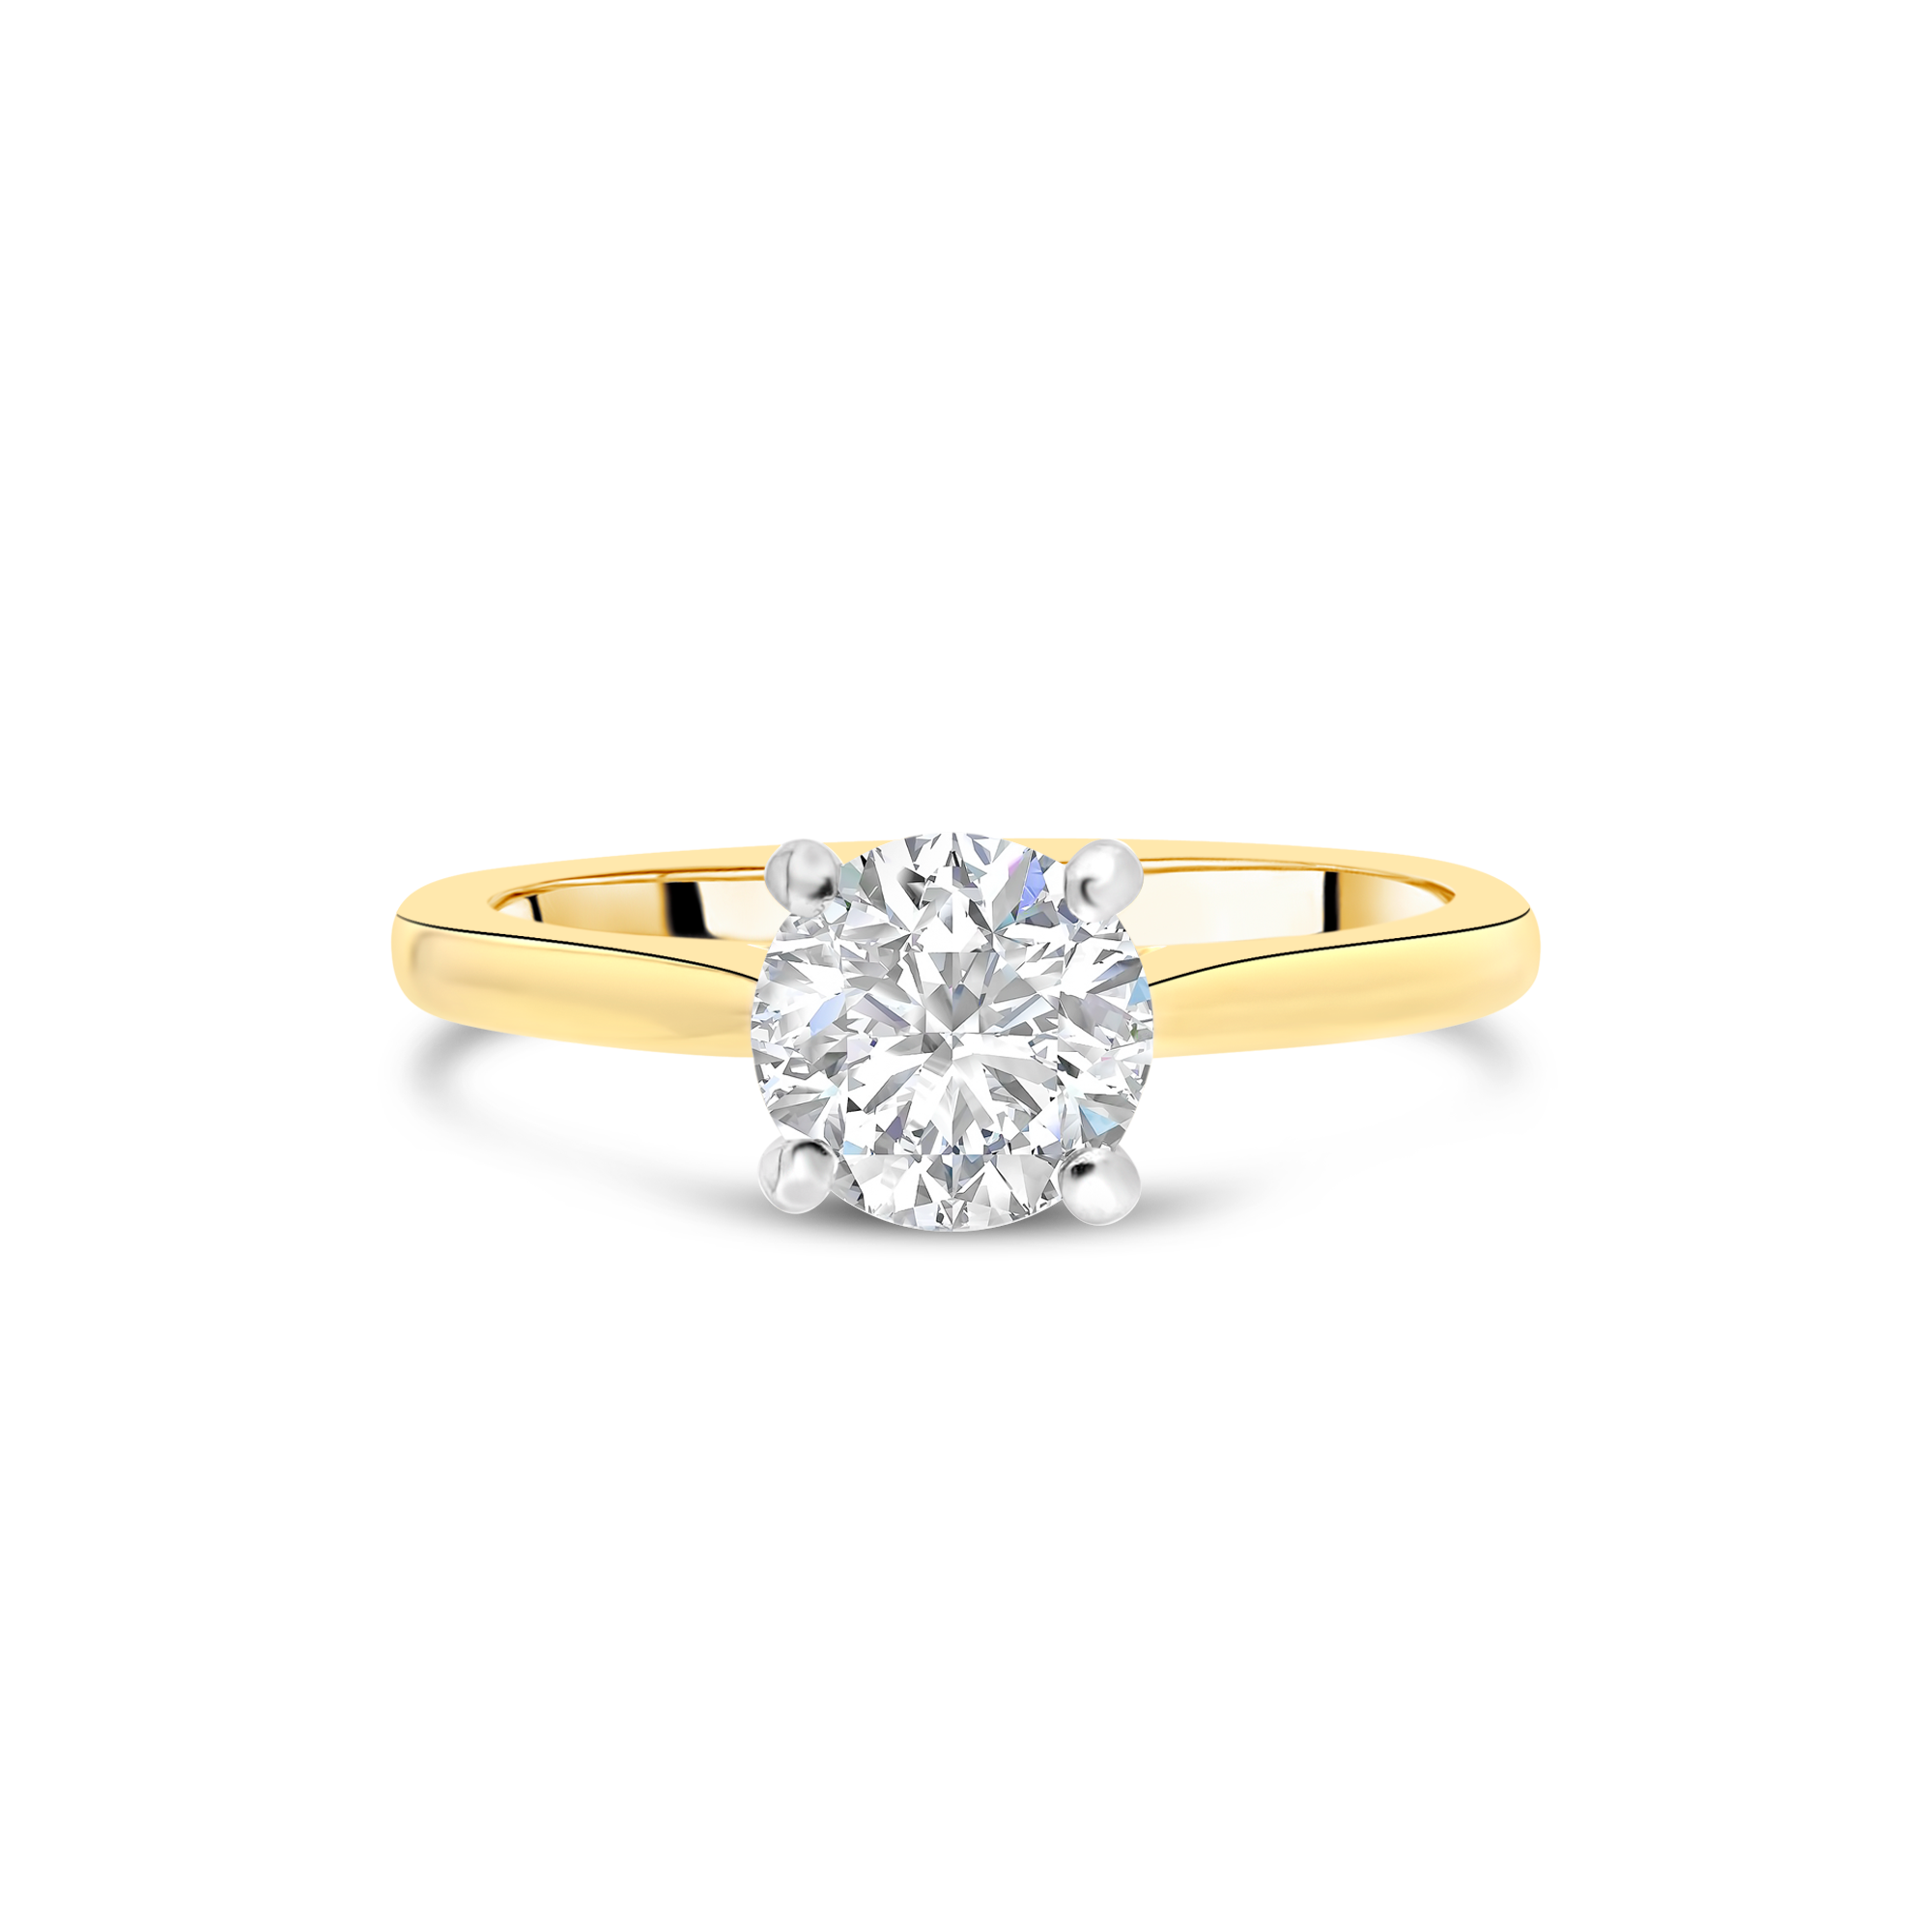 The "J'adore" Solitaire, Yellow Gold